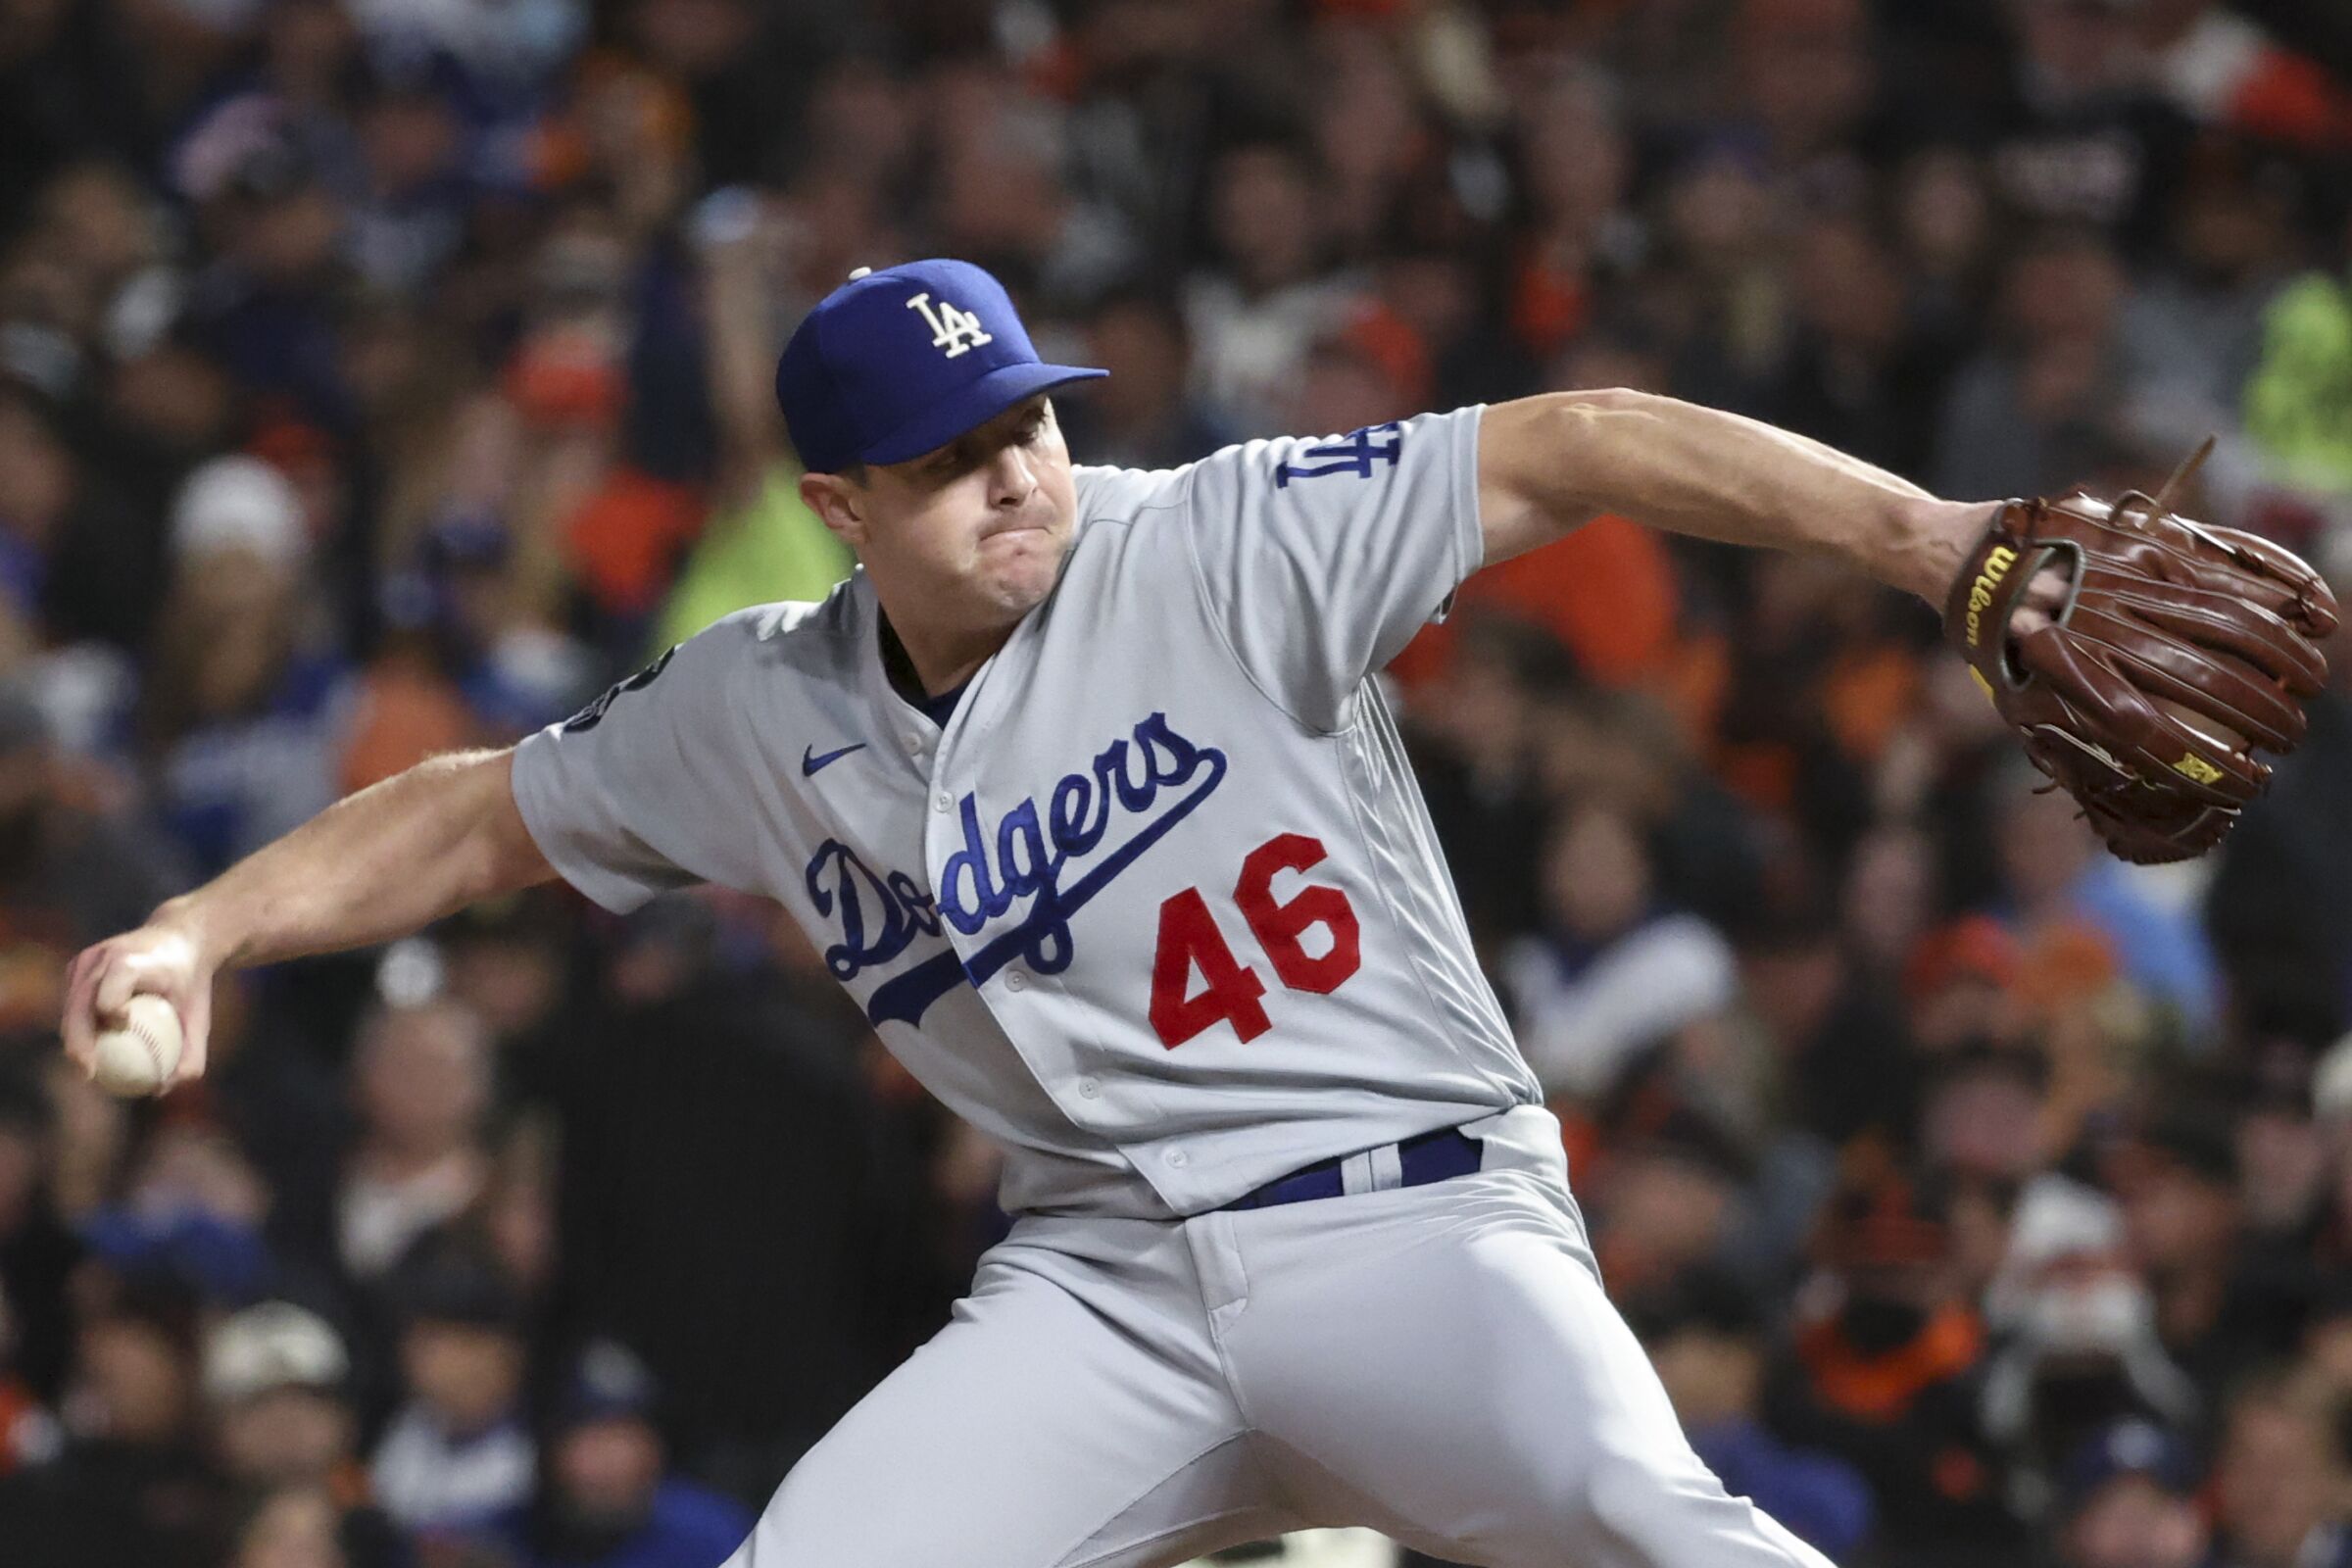 Dodgers relief pitcher Corey Knebel delivers during the seventh inning of Game 2 of the NLDS against the Giants.